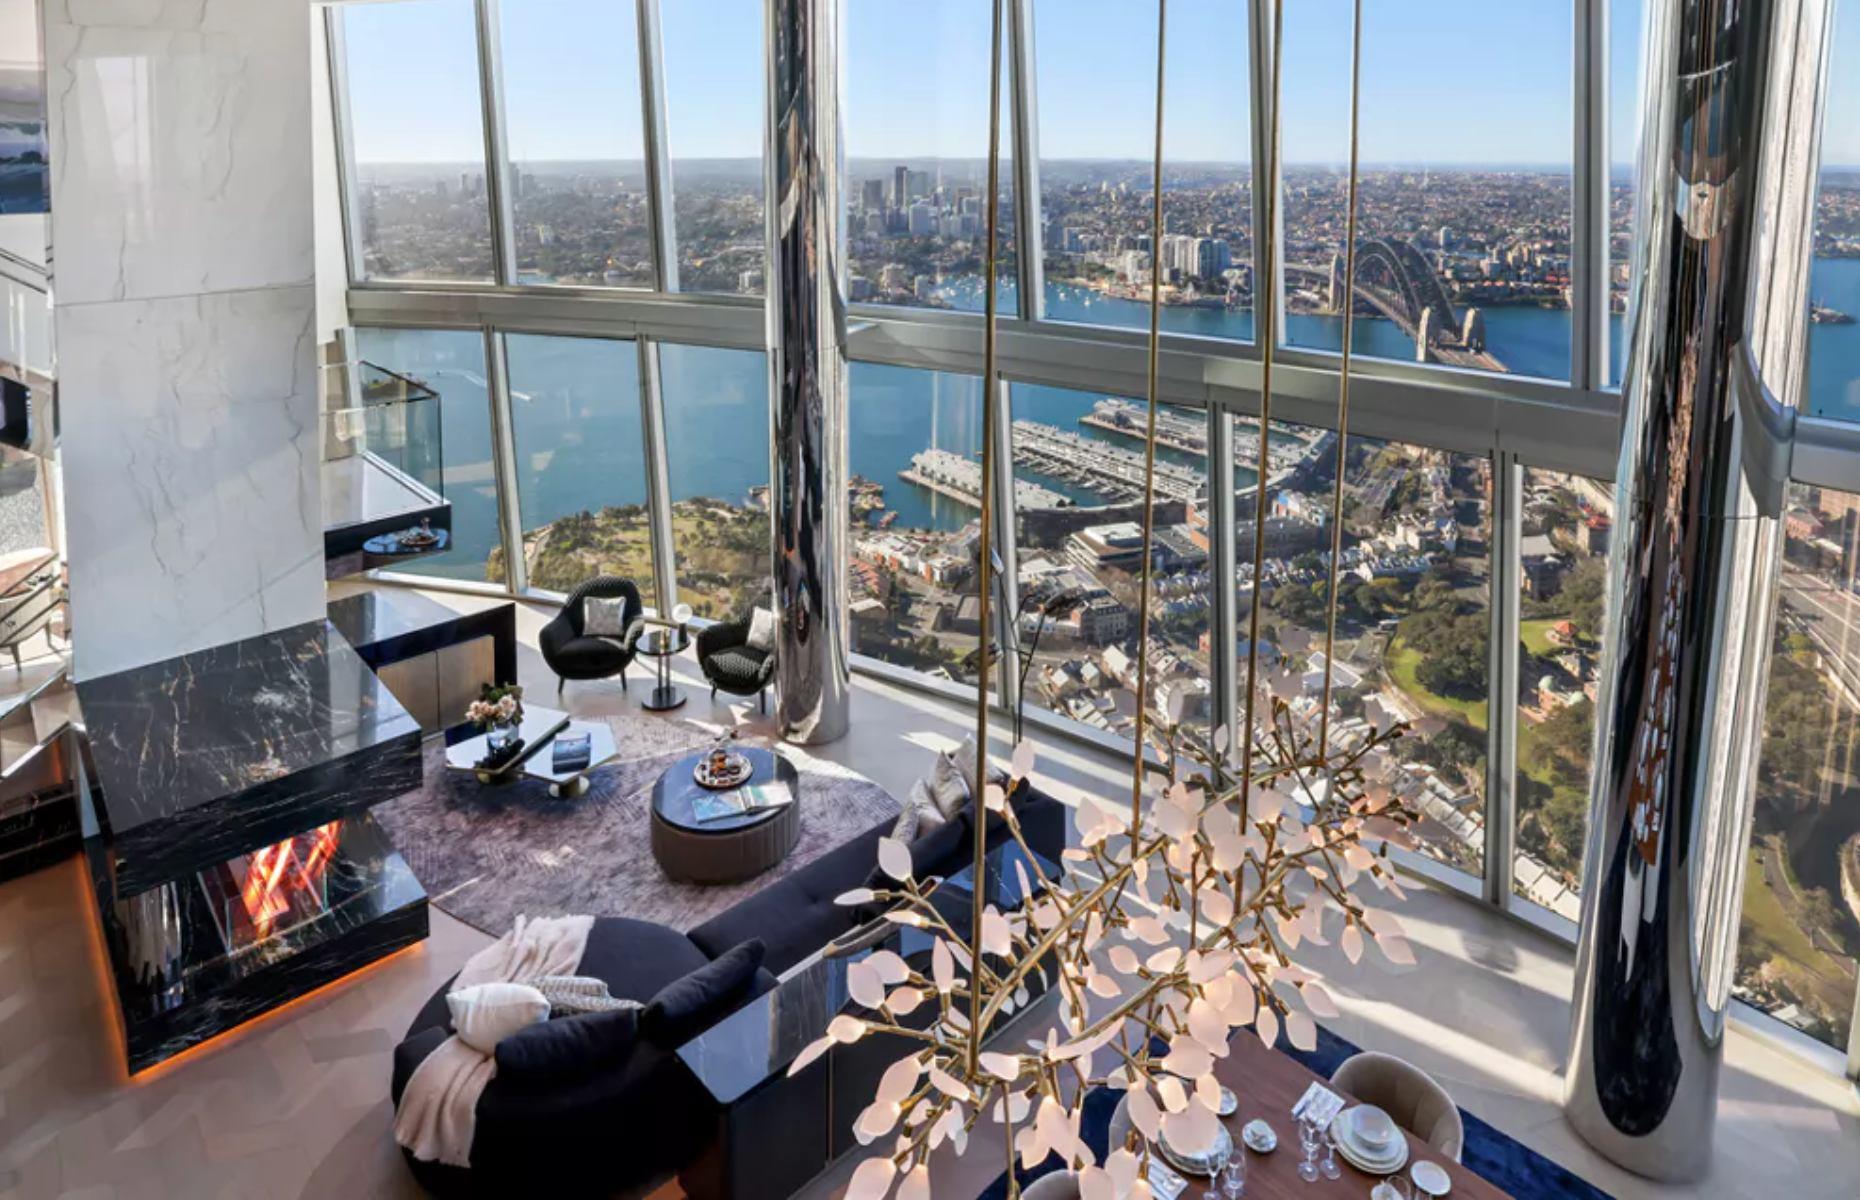 <p>Located atop Sydney’s tallest building, part-owned by James Packer, Australia’s media and casino mogul, it hovers 800 feet above sea level. There is 8,600 square feet of luxury space, a cathedral of glass, chrome, and black marble. The penthouse offers several entertaining areas as well as an office, private plunge pool, cinema room, gym, and over 500 square feet of outside space across three protected balconies. </p>